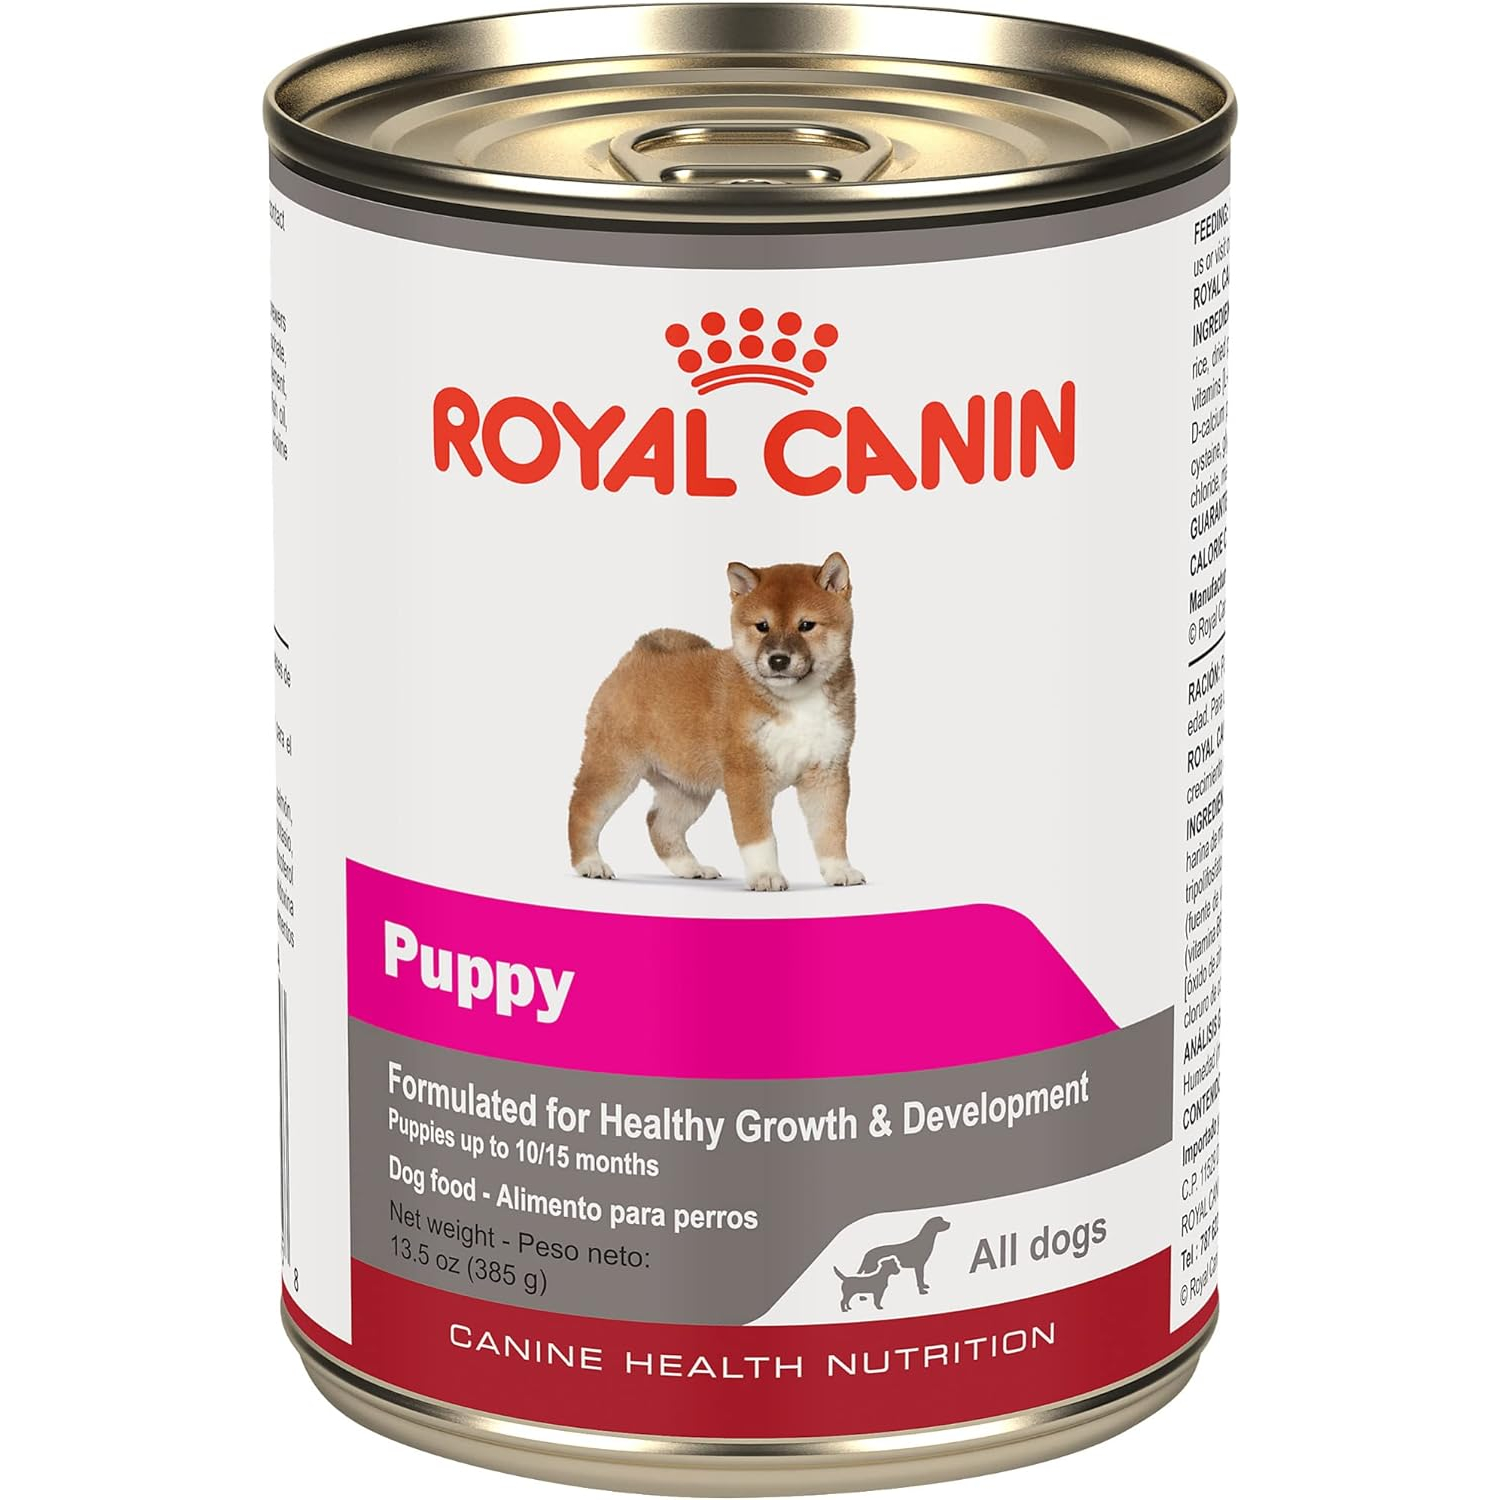 Royal Canin Canned Puppy Food